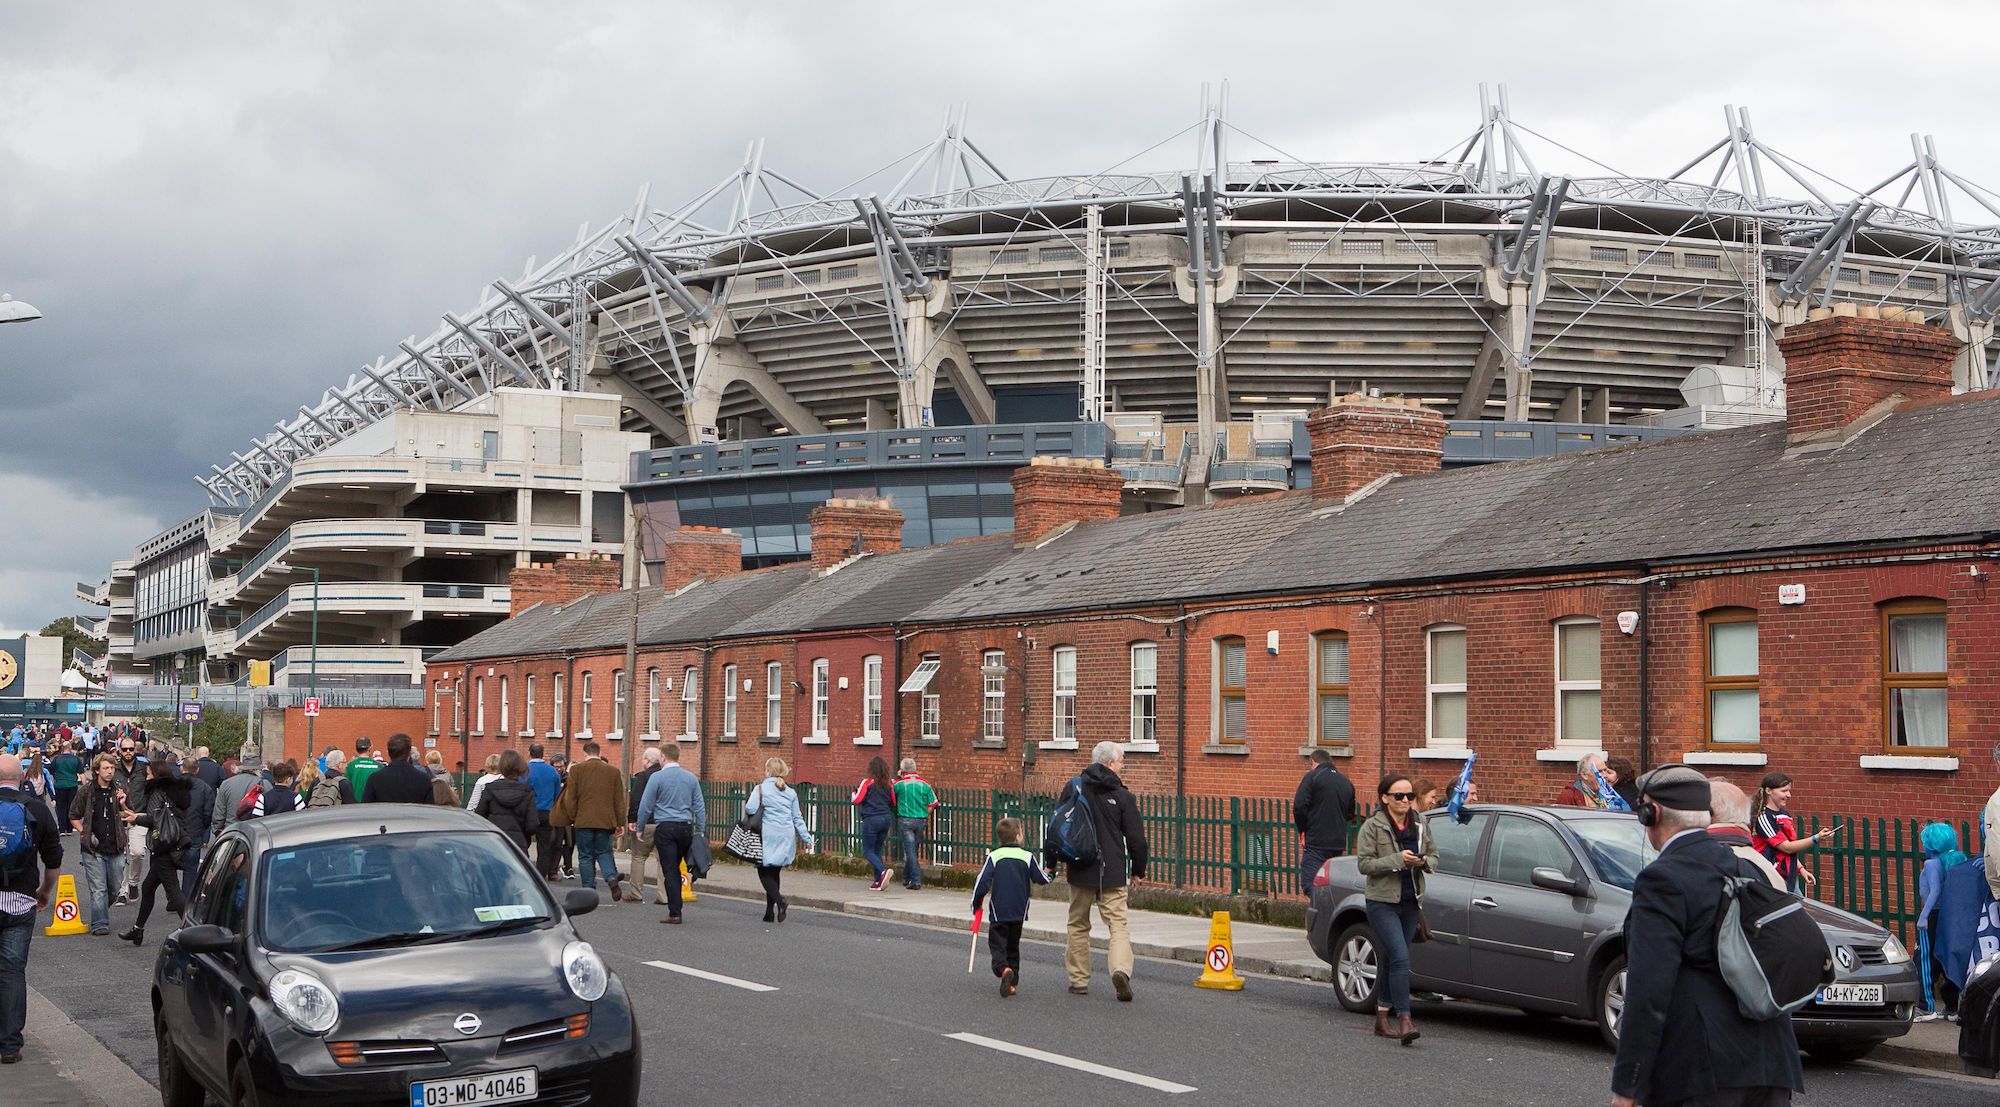 Supporters arrive outside Croke Park for the GAA All-Ireland Gaelic Football Final replay match between Dublin and Mayo at Croke Park, Dublin, Ireland, on October 1, 2016. Photo: Karl Burke/AFP. The biggest crowd in Europe on Saturday will not be watching detached professionals kissing the badge of their latest football team, but at the All-Ireland Gaelic football final. Two amateur teams, Dublin and Mayo, will attempt to win the coveted All-Ireland trophy for Gaelic football in a replay following a rare draw two weeks ago. / AFP / Karl Burke (Photo credit should read KARL BURKE/AFP via Getty Images)